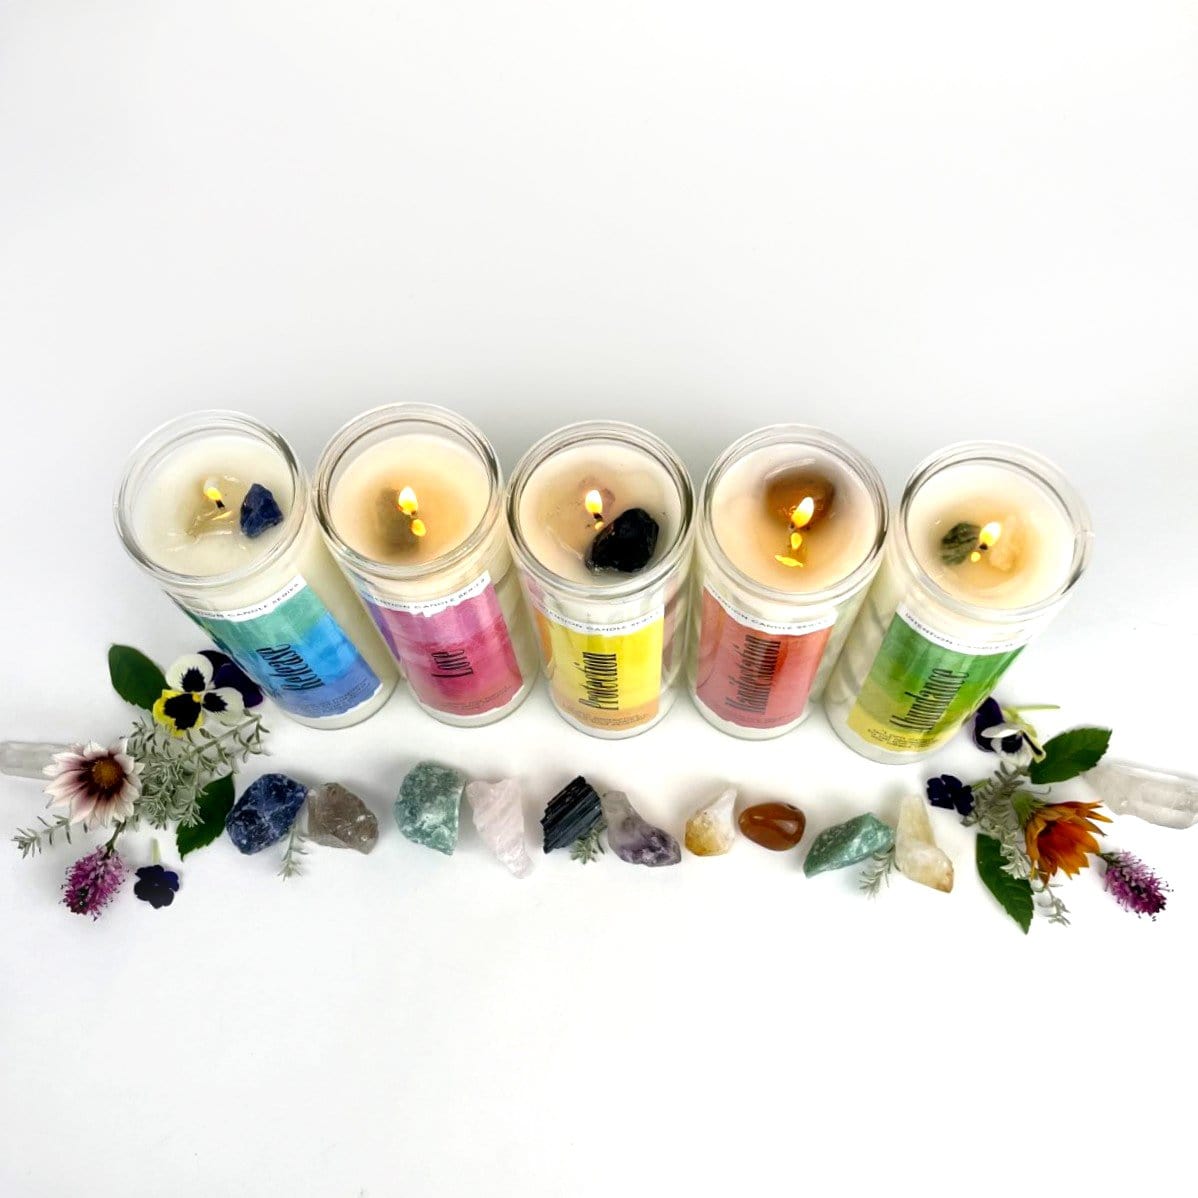 All of the candles available in this series, ;looking down on the wick lit, and the 2 stones in each candle